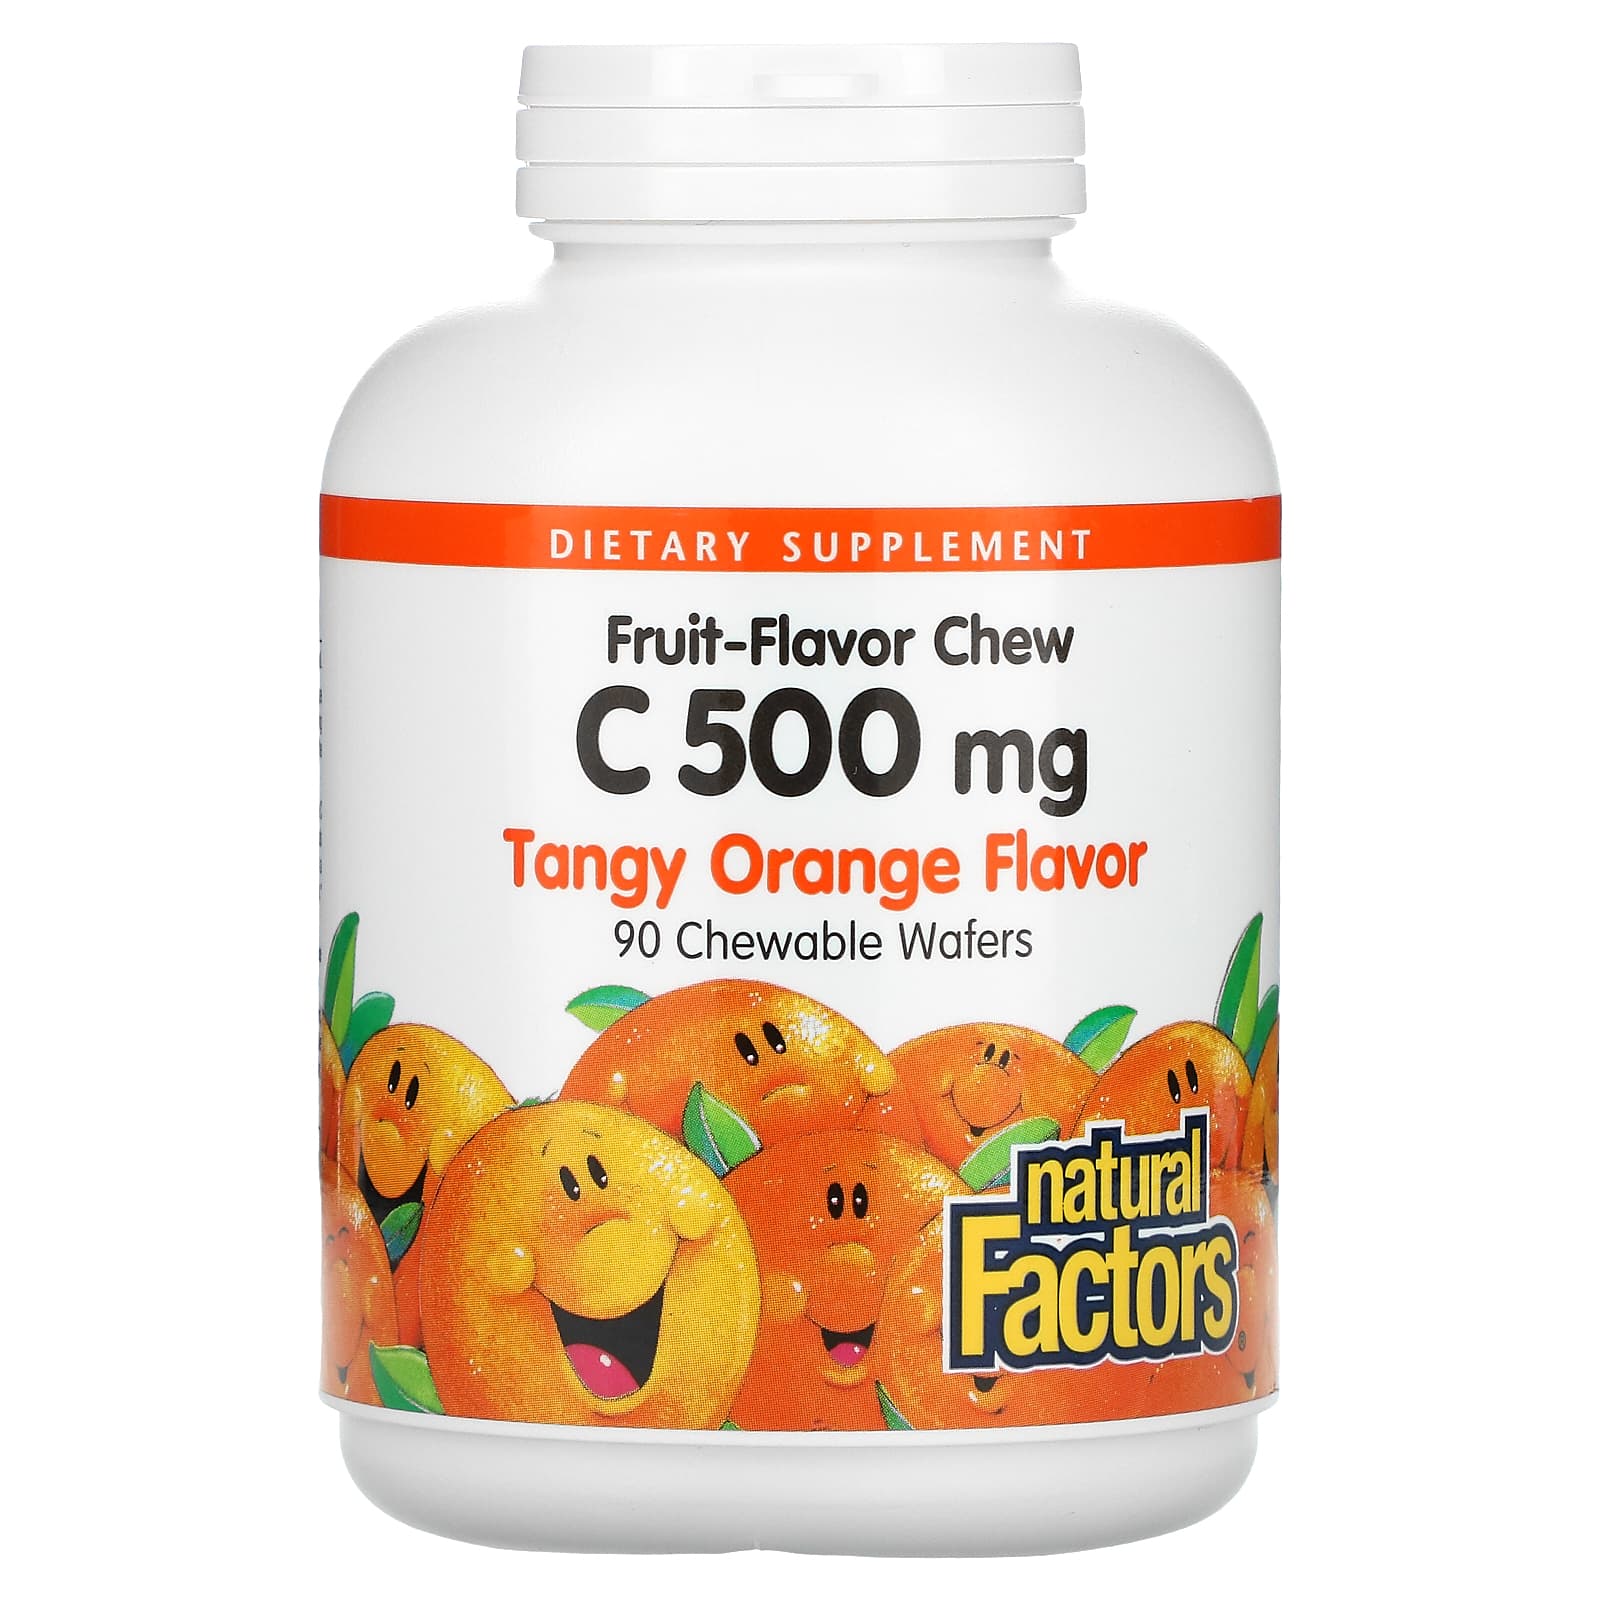 Natural Factors C 500 Mg, Tangy Orange Flavor, 90 Chewable Wafers